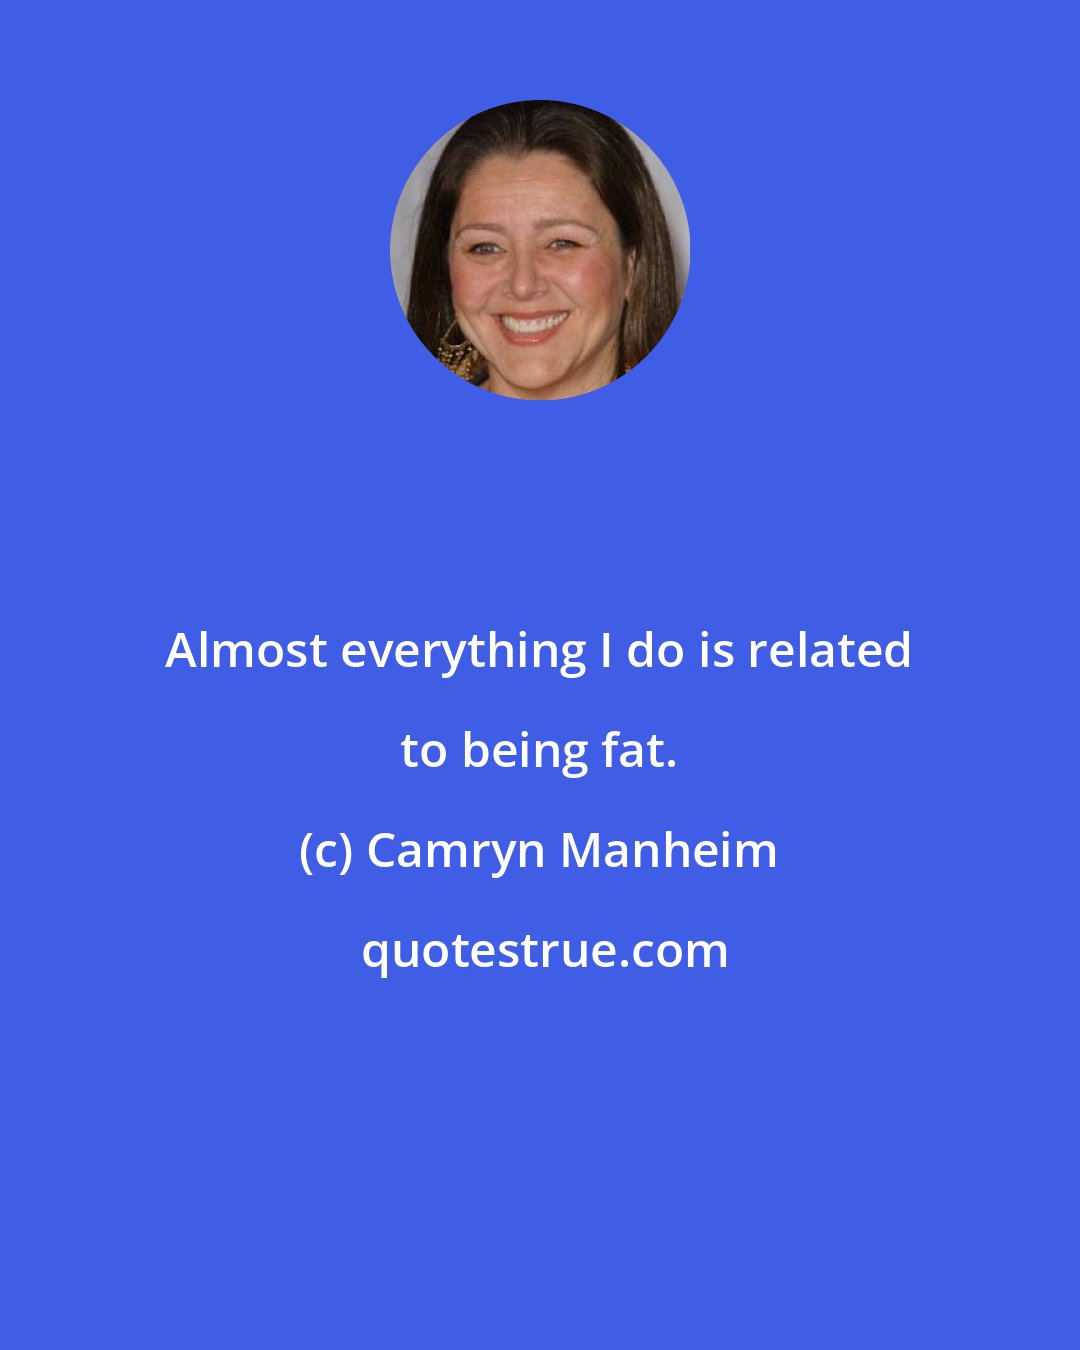 Camryn Manheim: Almost everything I do is related to being fat.